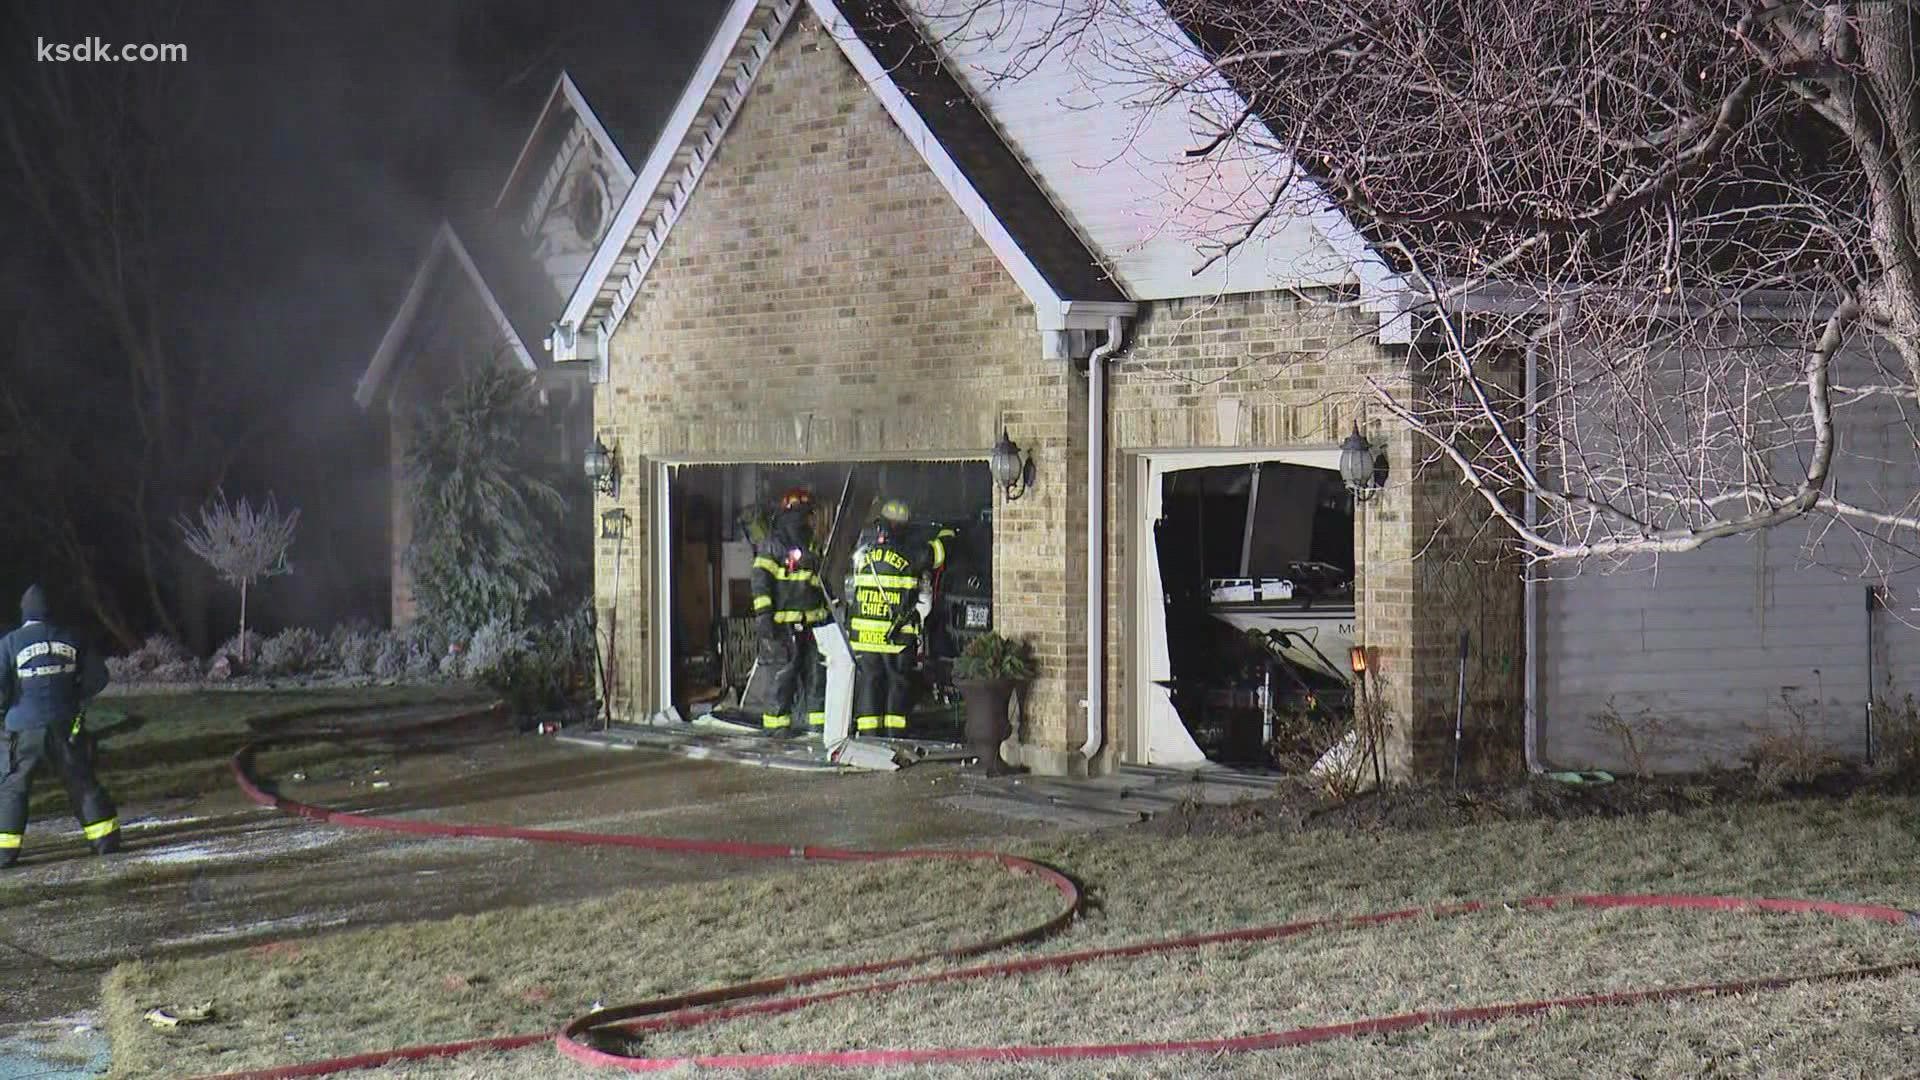 A couple lived in the home and got out safely. Firefighters say the fire started in the basement after a boom was heard.